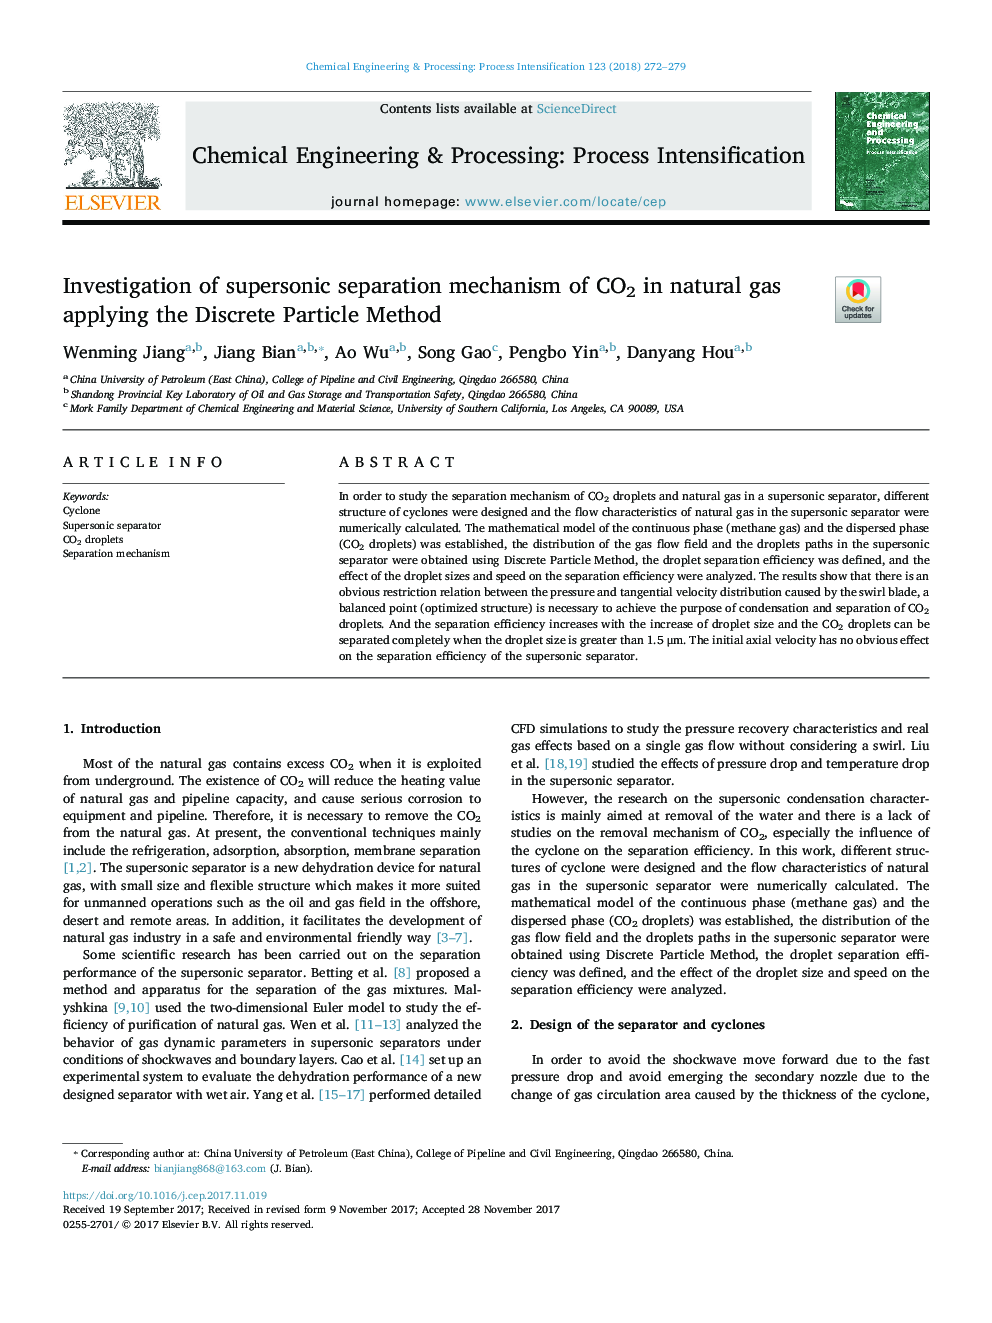 Investigation of supersonic separation mechanism of CO2 in natural gas applying the Discrete Particle Method